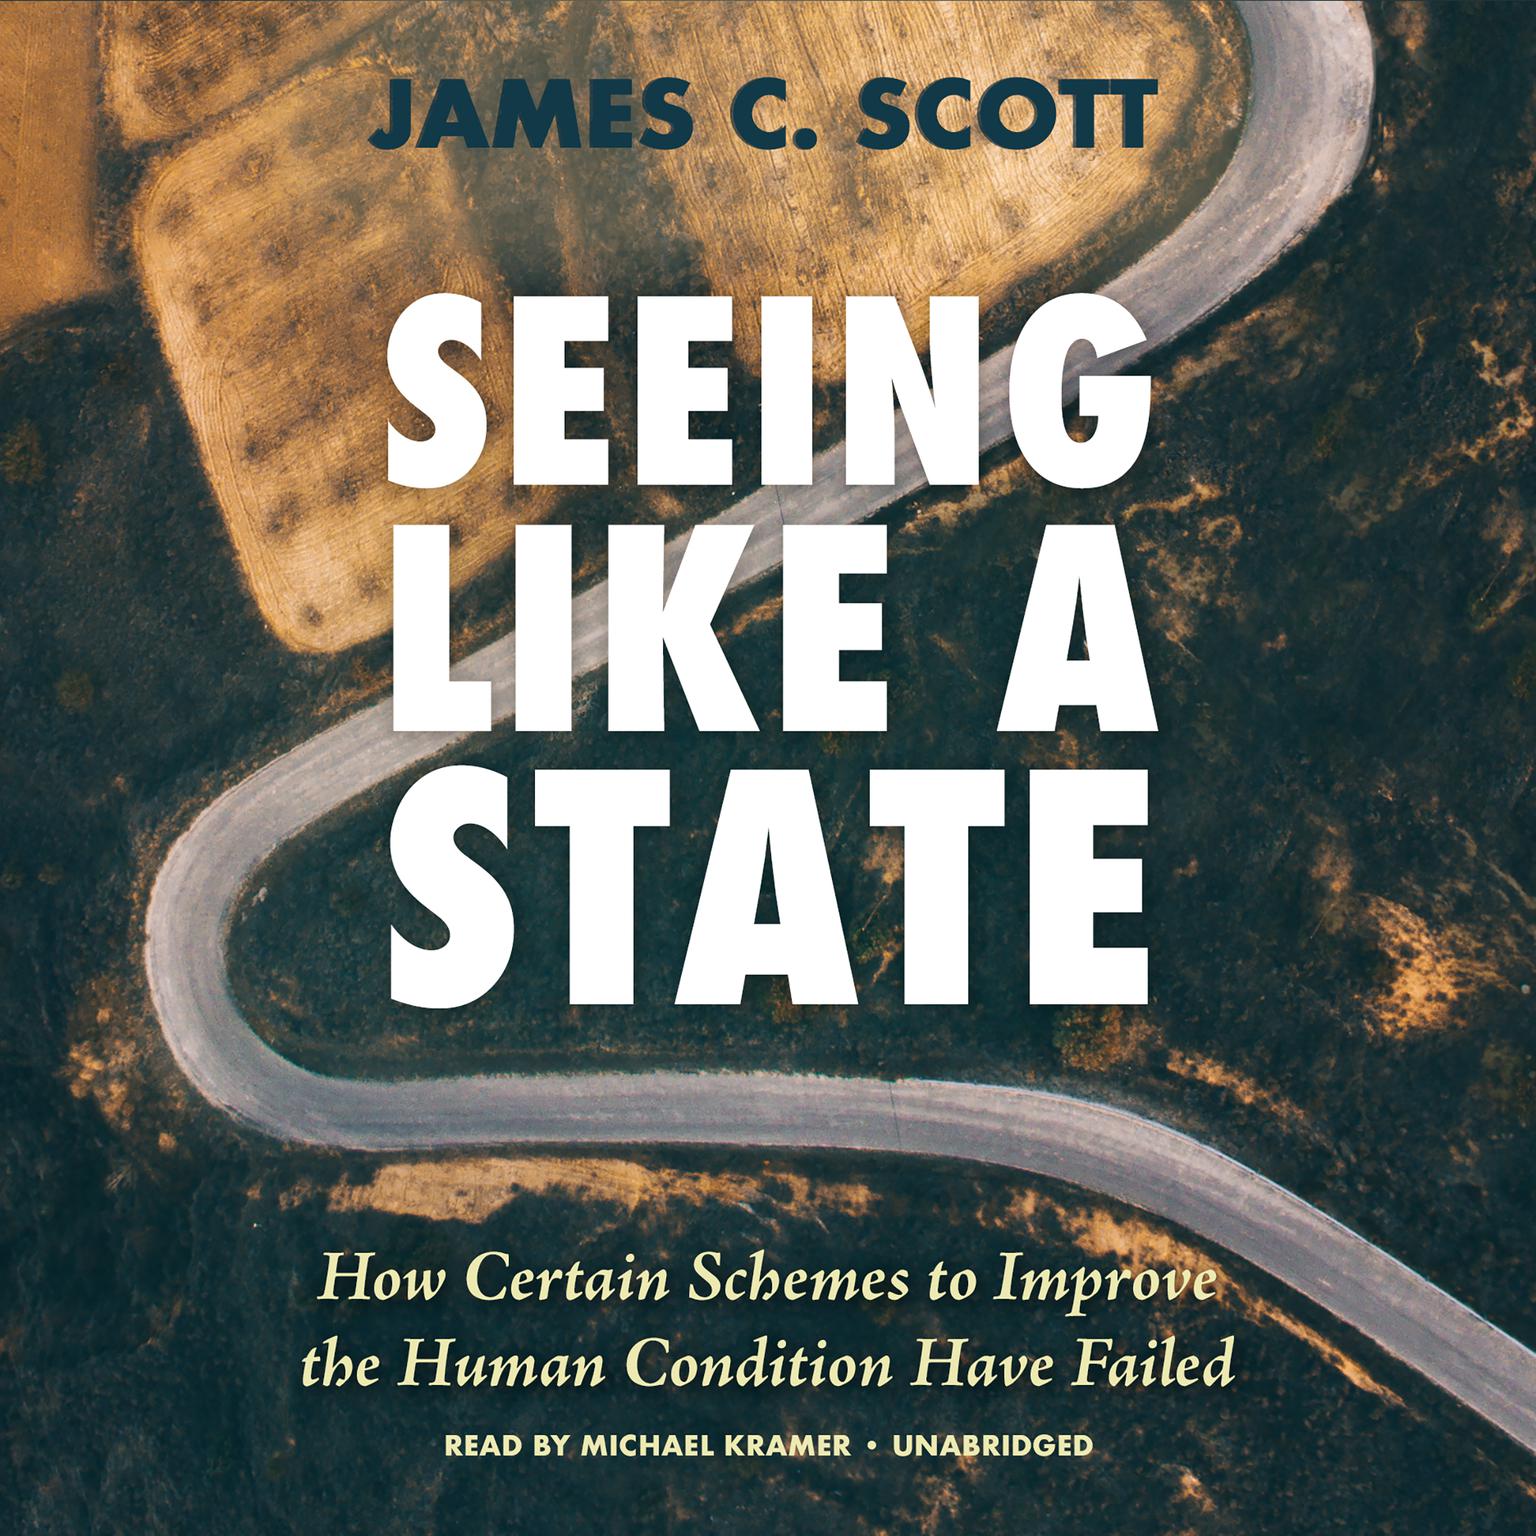 Seeing like a State: How Certain Schemes to Improve the Human Condition Have Failed Audiobook, by James C. Scott